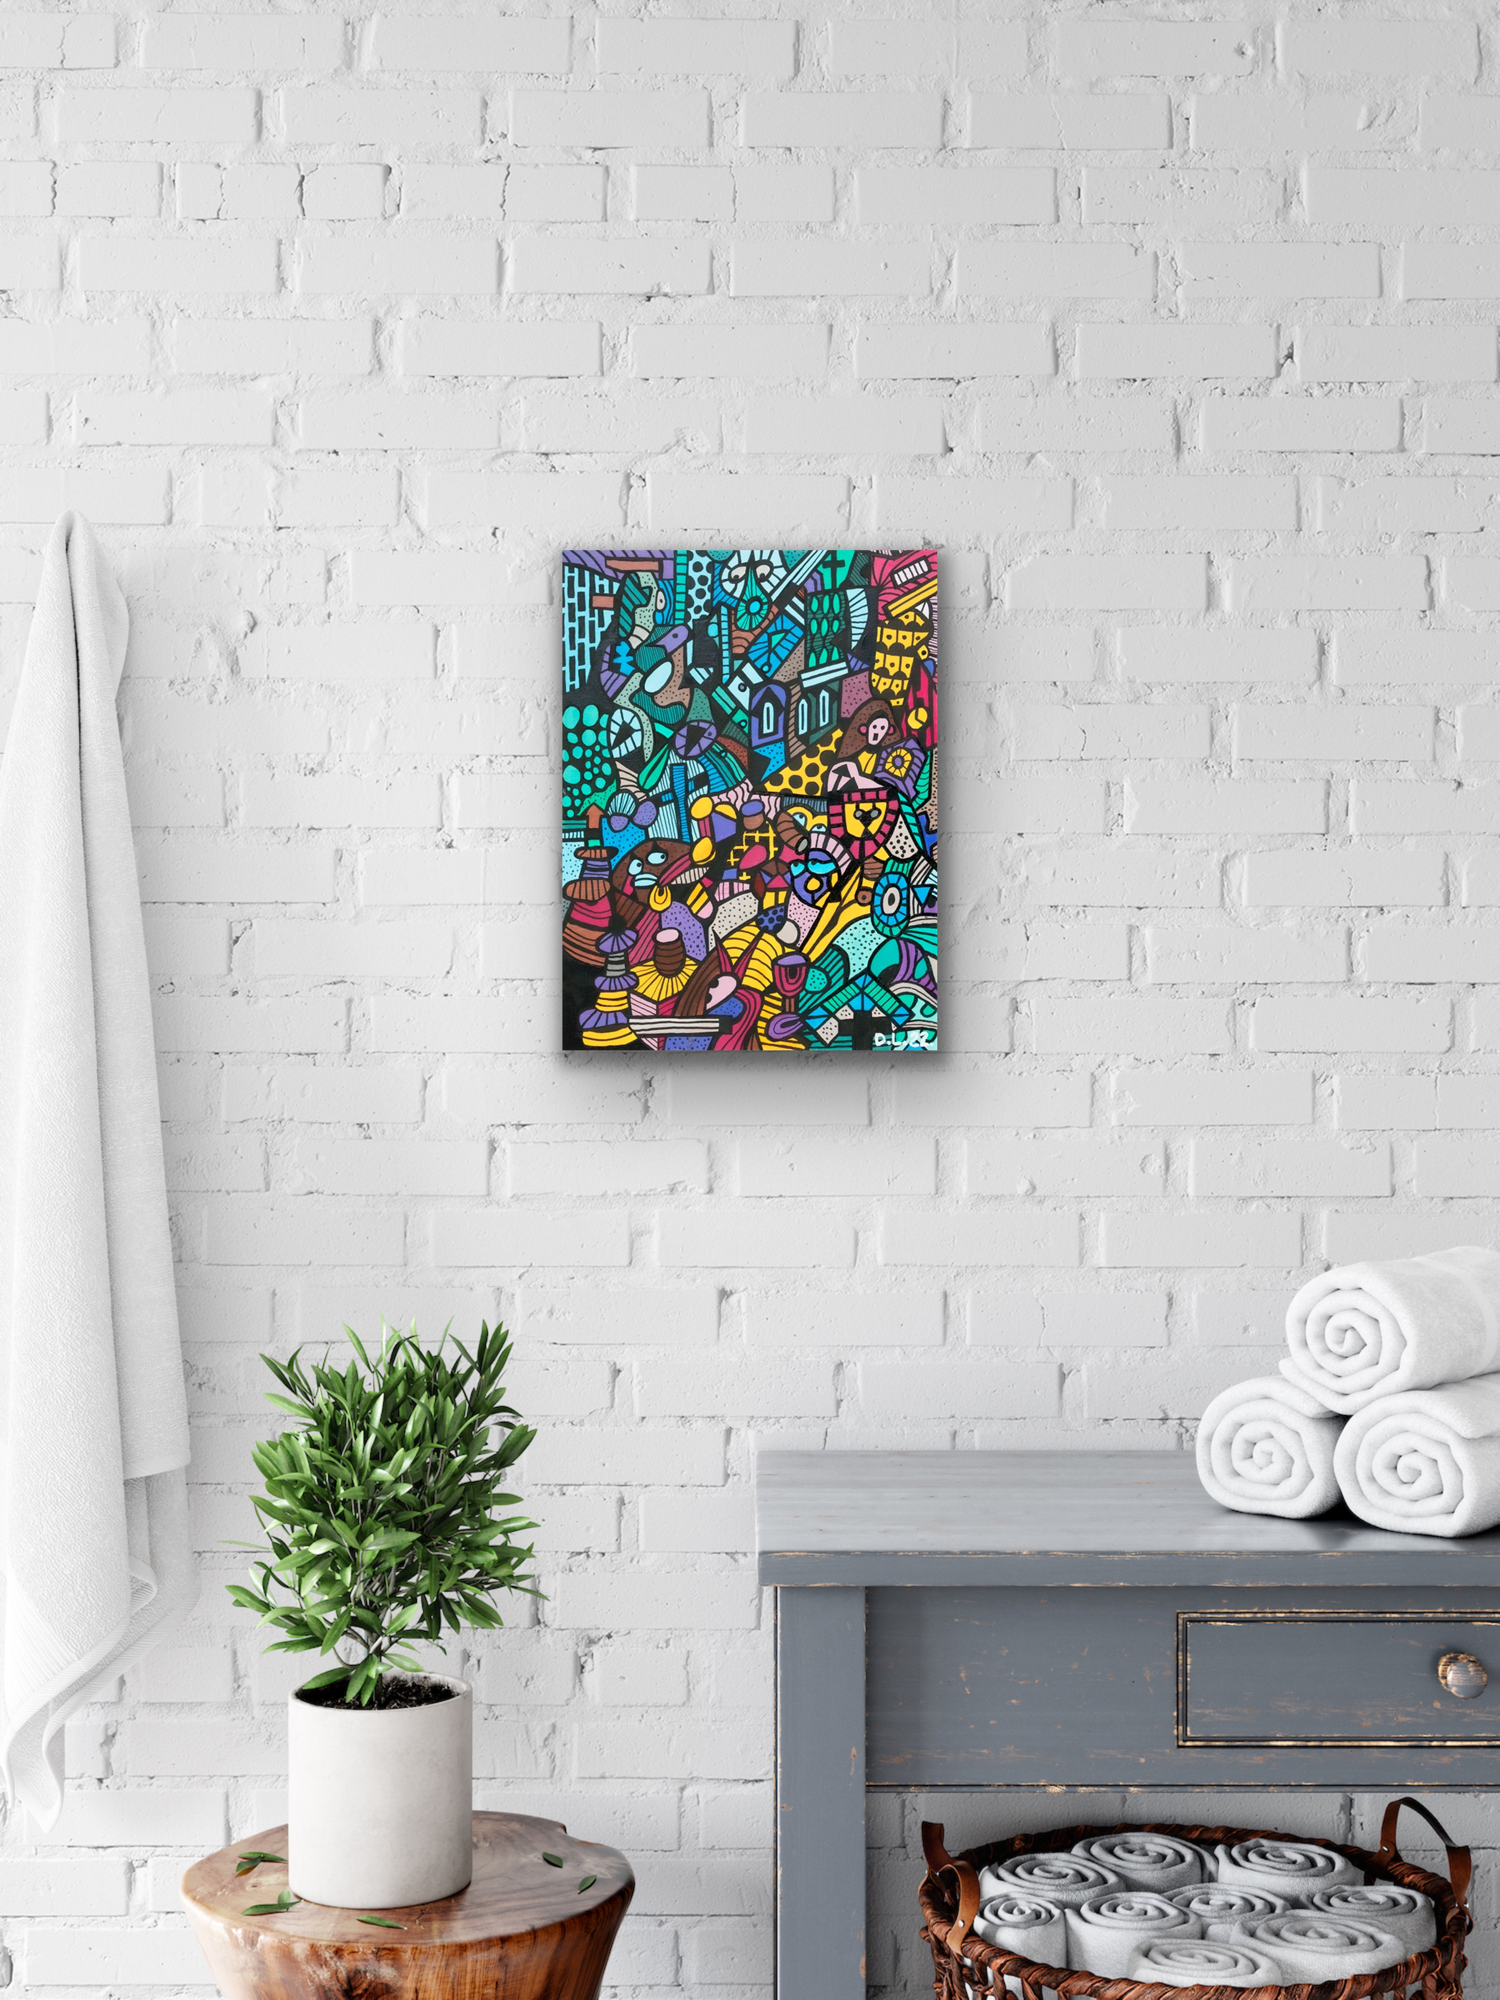 "Yamkey River" art piece comes in three different canvas print sizes.